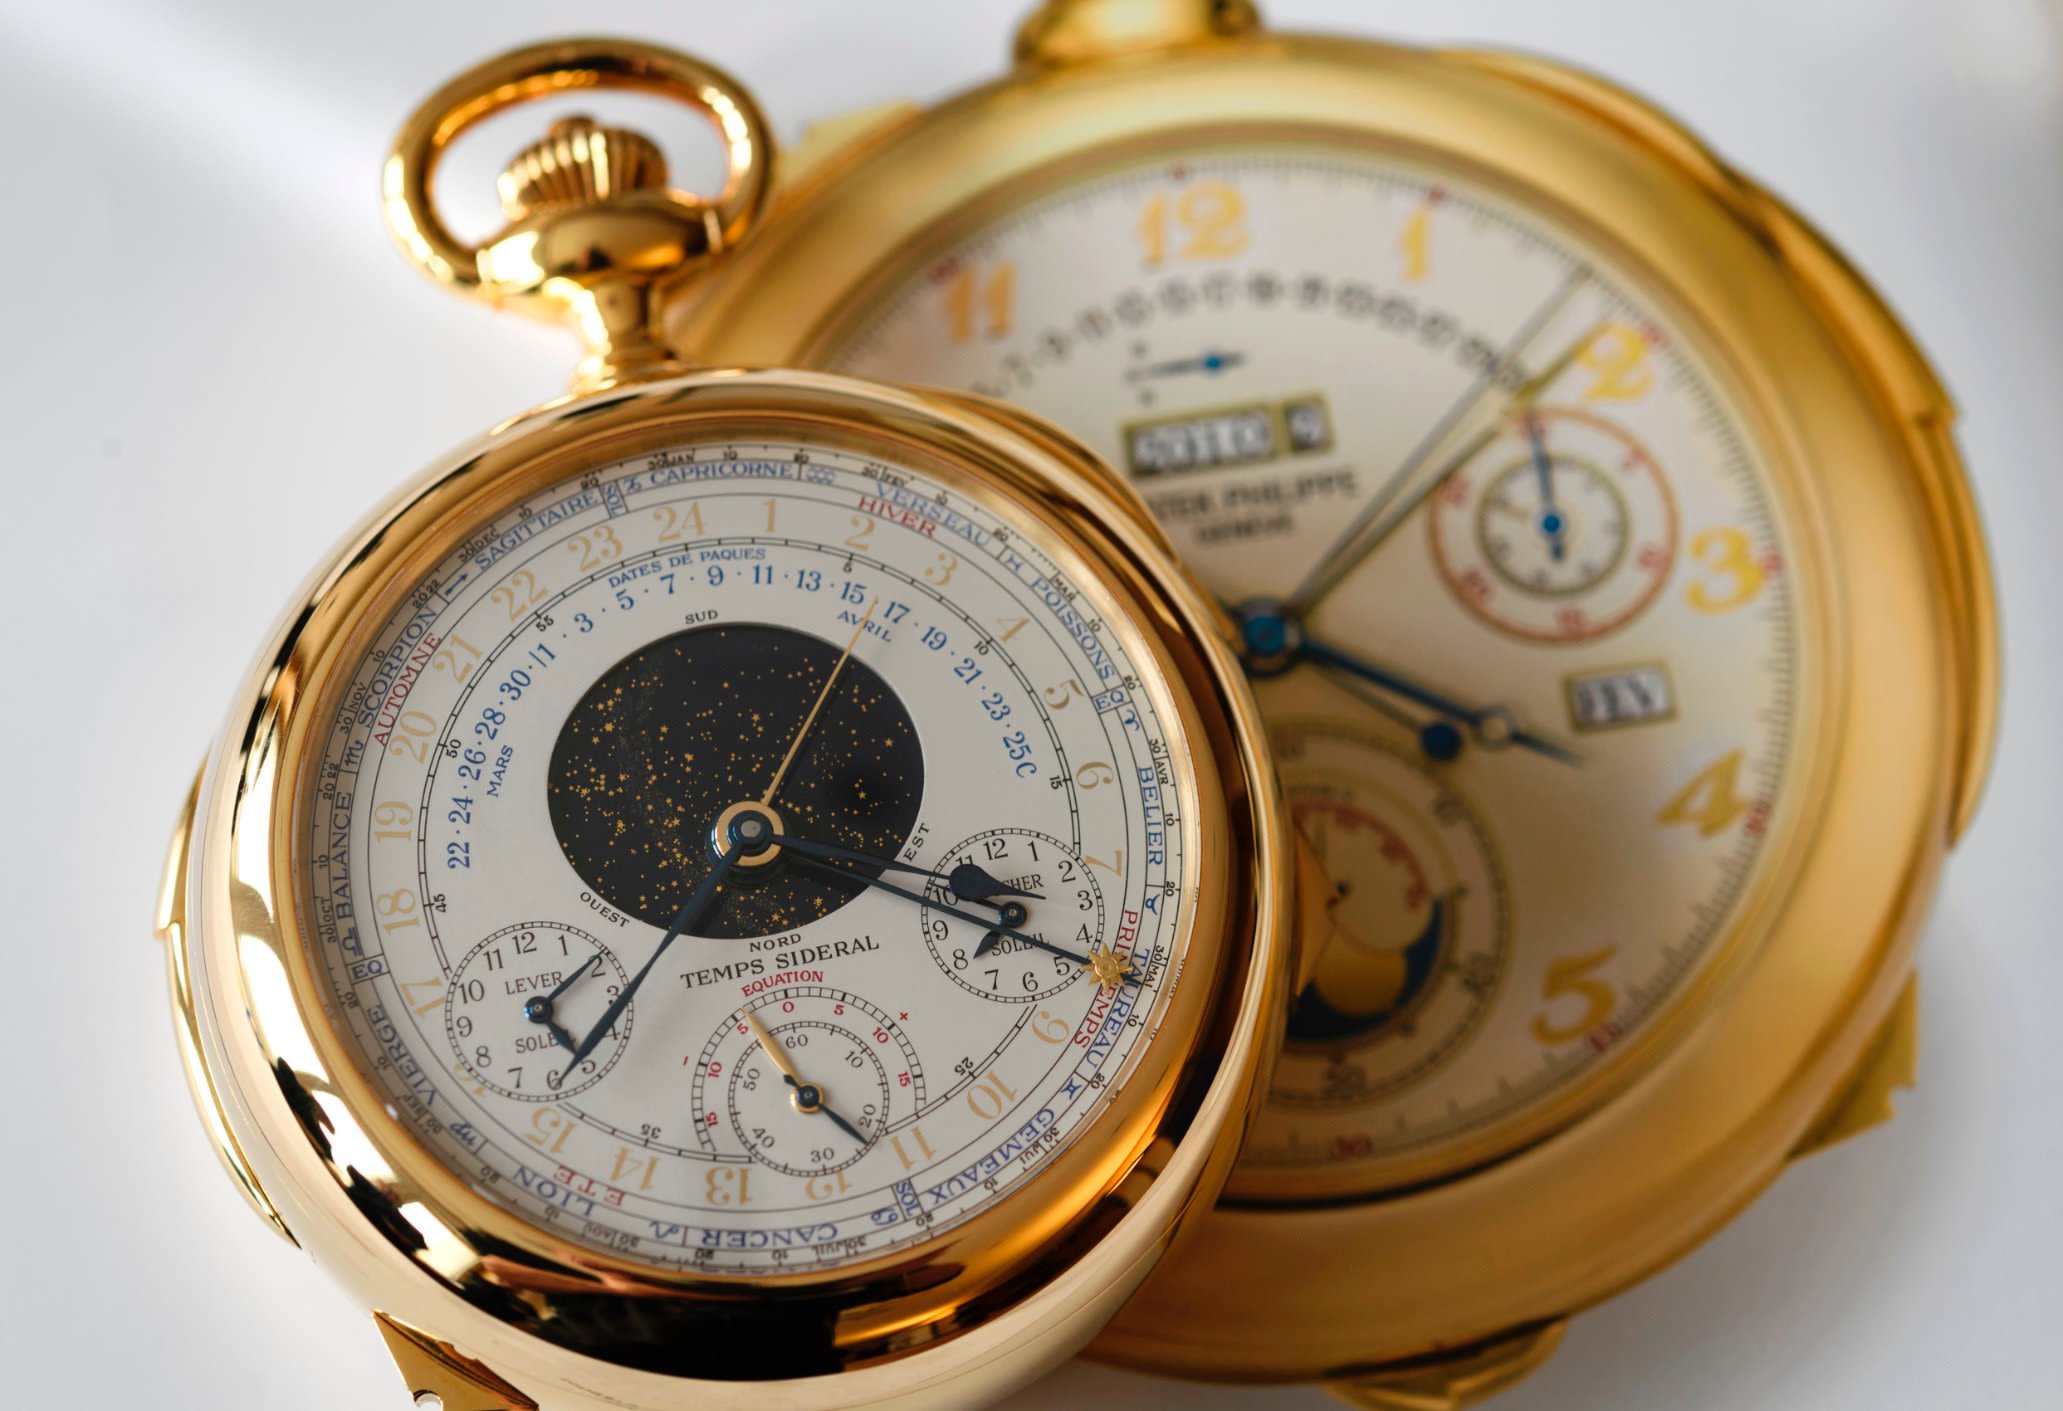 Why collectors covet Patek Philippe timepieces